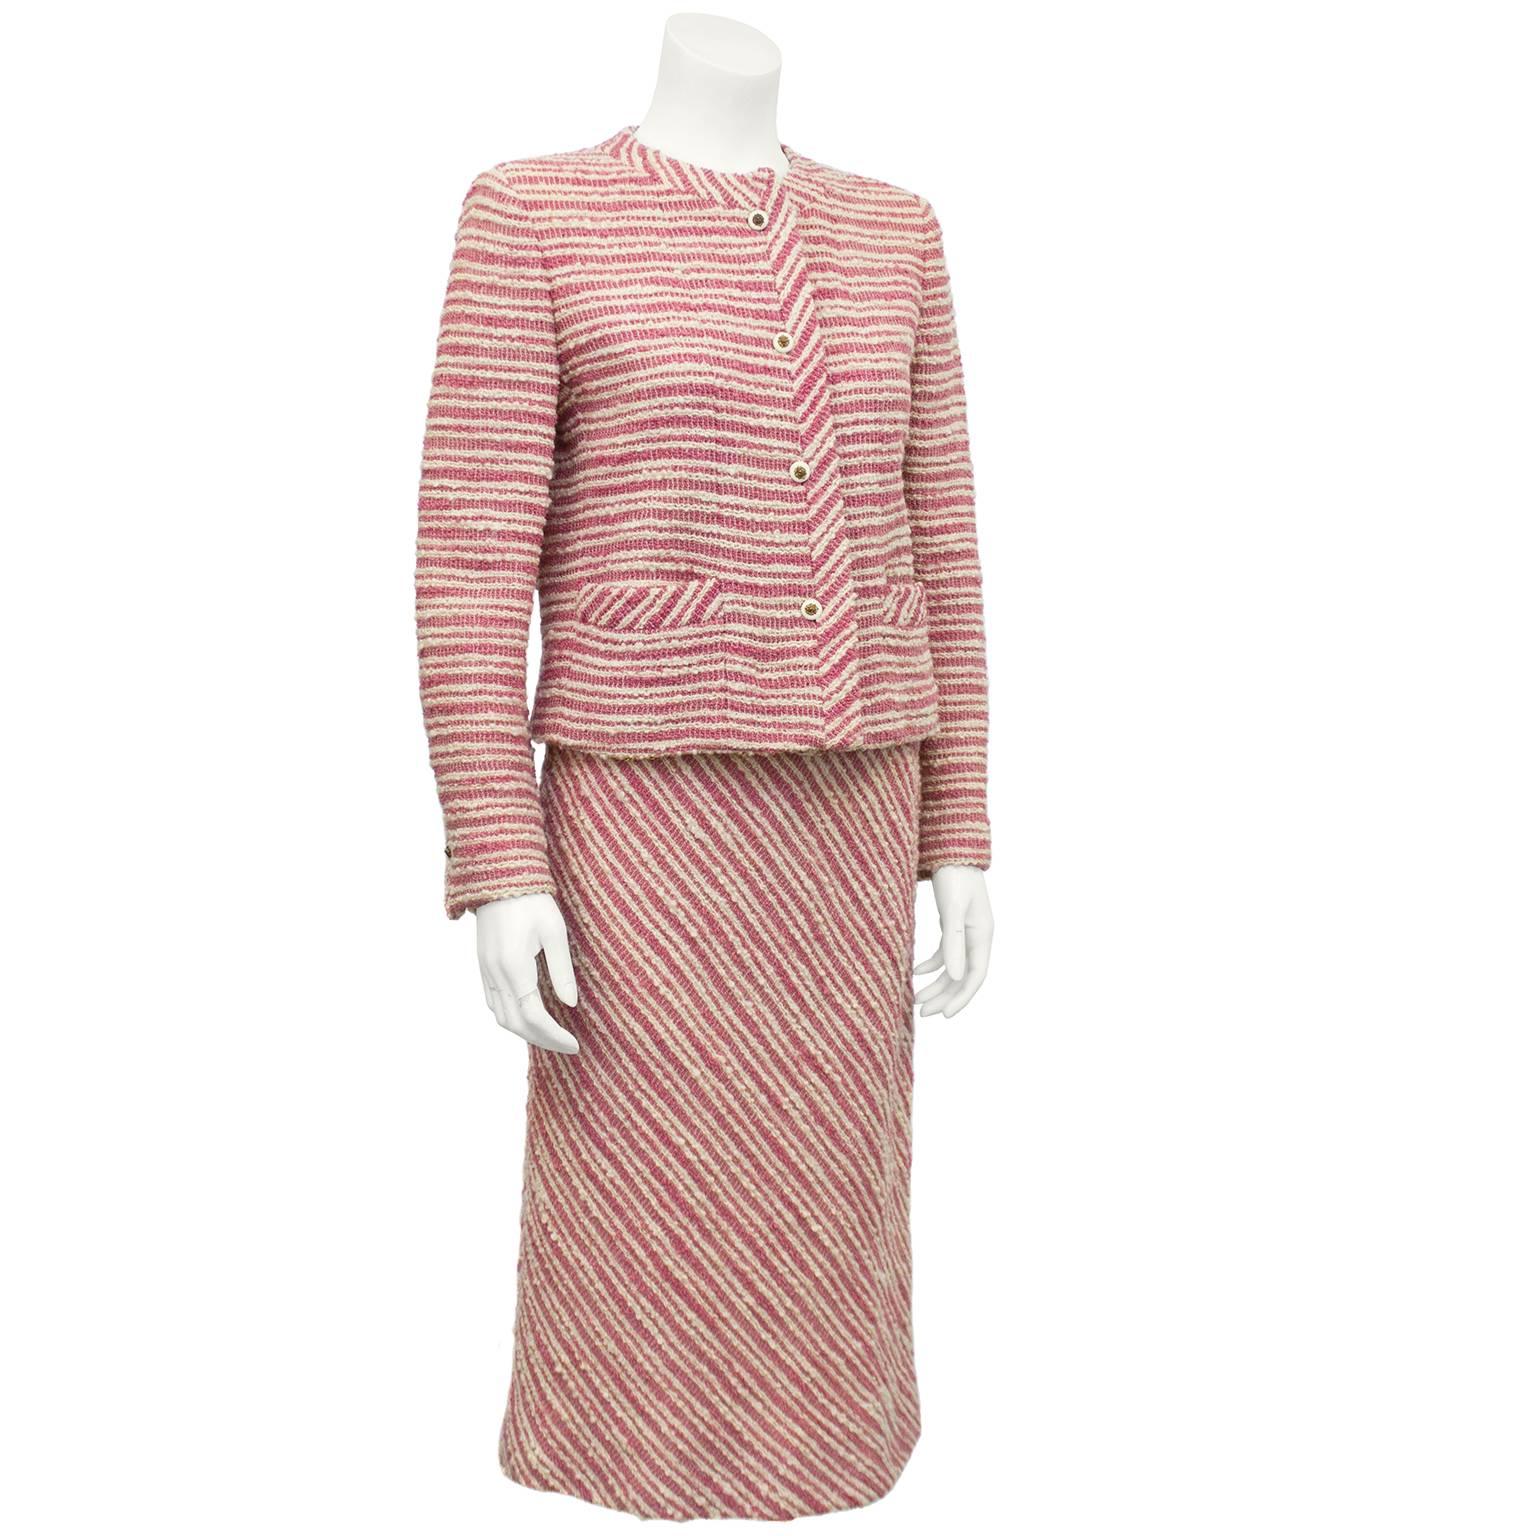 1970s Chanel Creations label pink and cream boucle striped skirt suit. The jacket is in the classic Chanel style with a rounded neckline and pockets accented with the matching pink and cream striped fabric on a diagonal. Cream buttons with lions